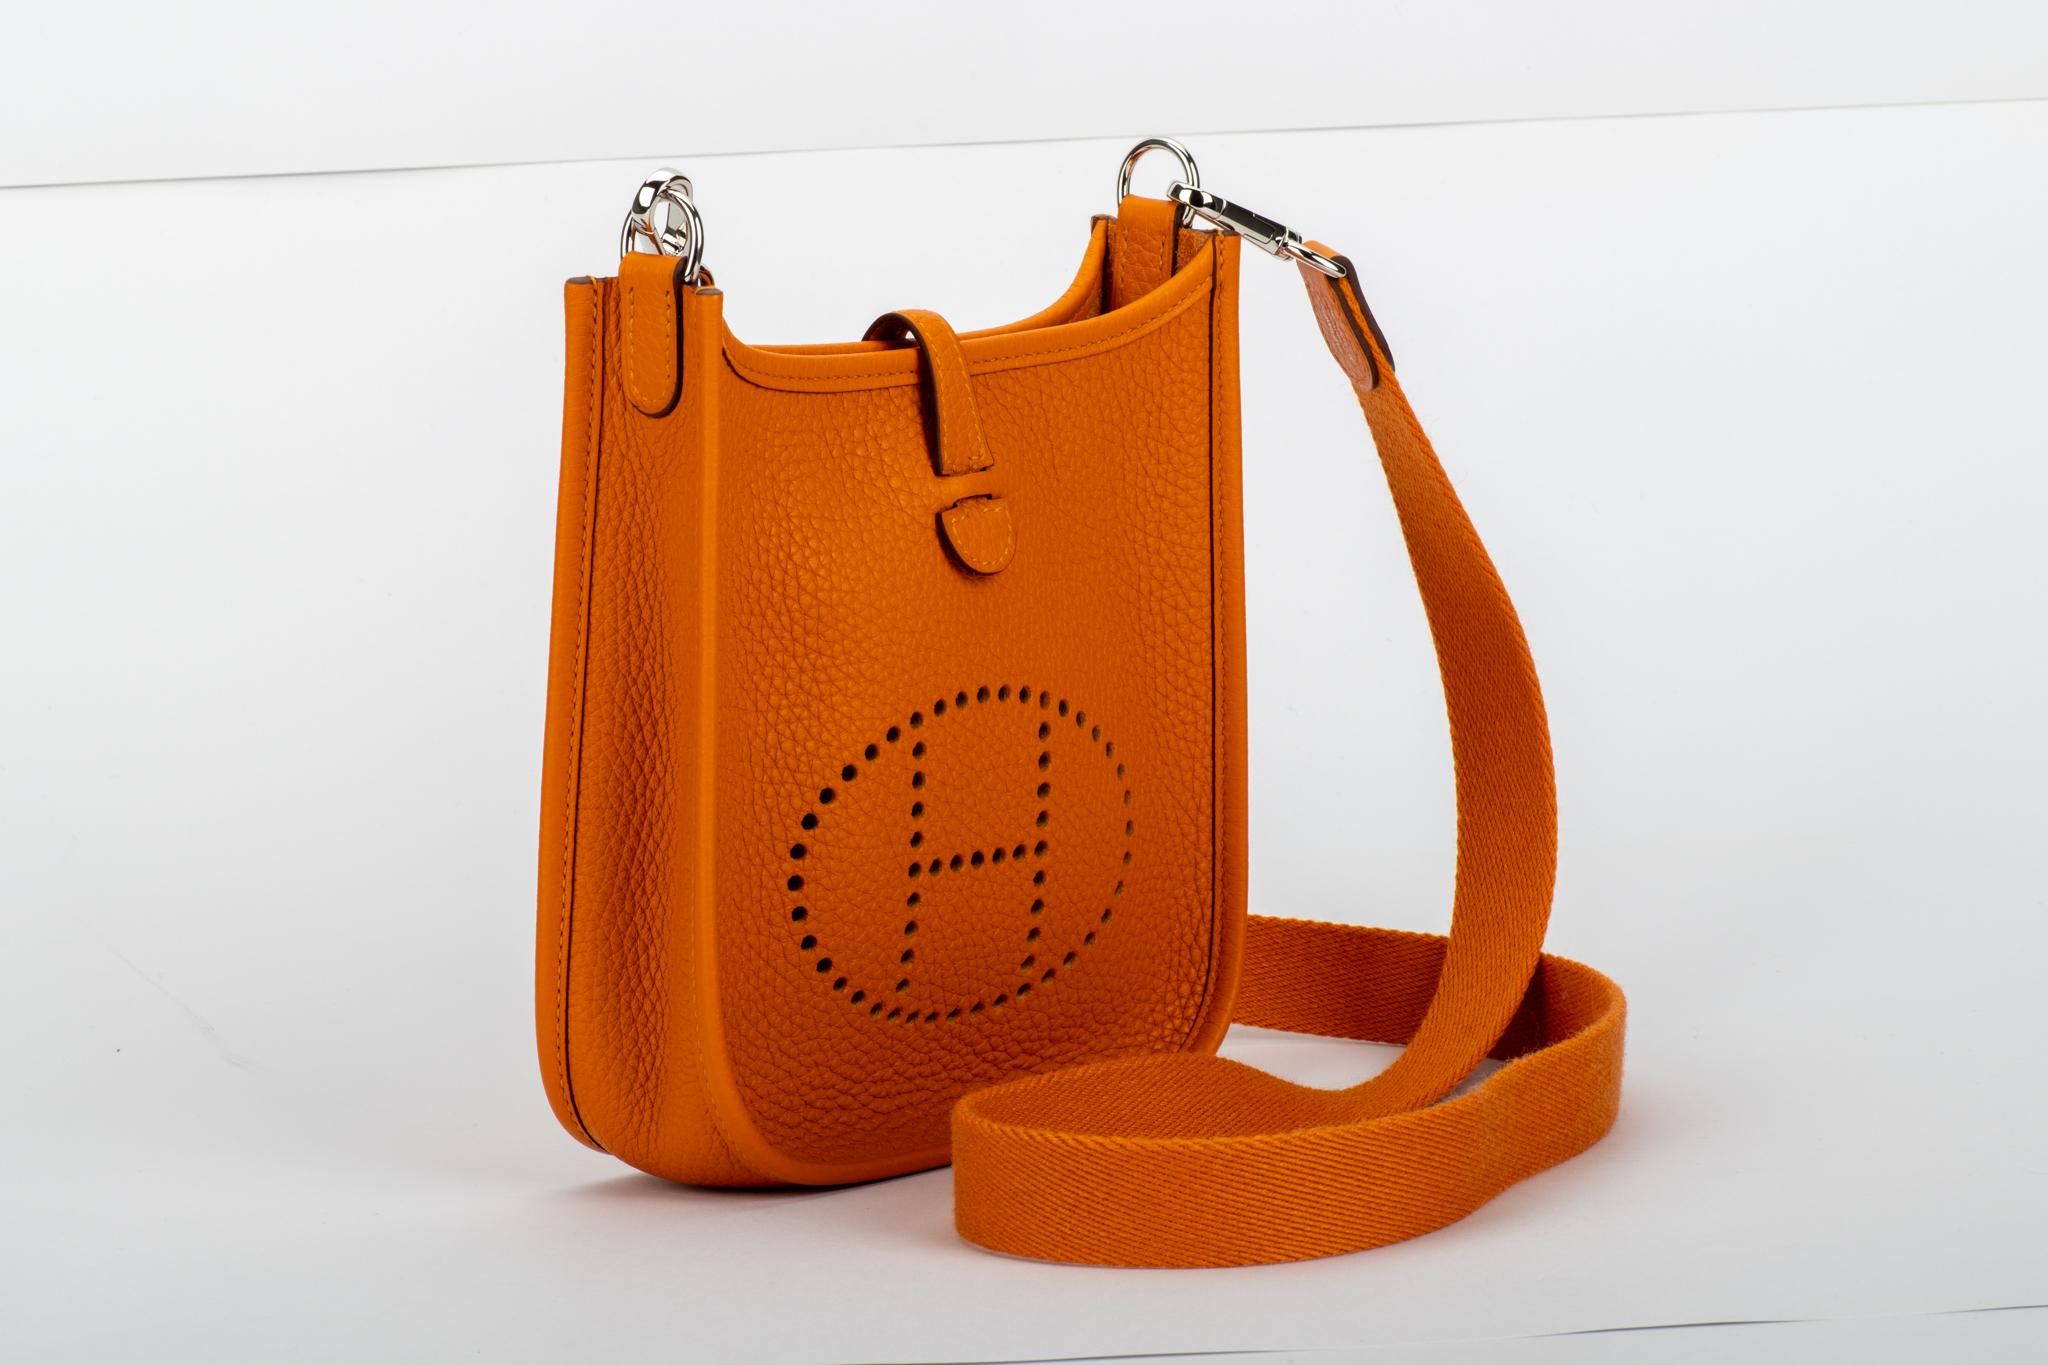 Hermès mini Evelyne shoulder bag in apricot taurillon clemence leather palladium hardware. Never used. Dated 